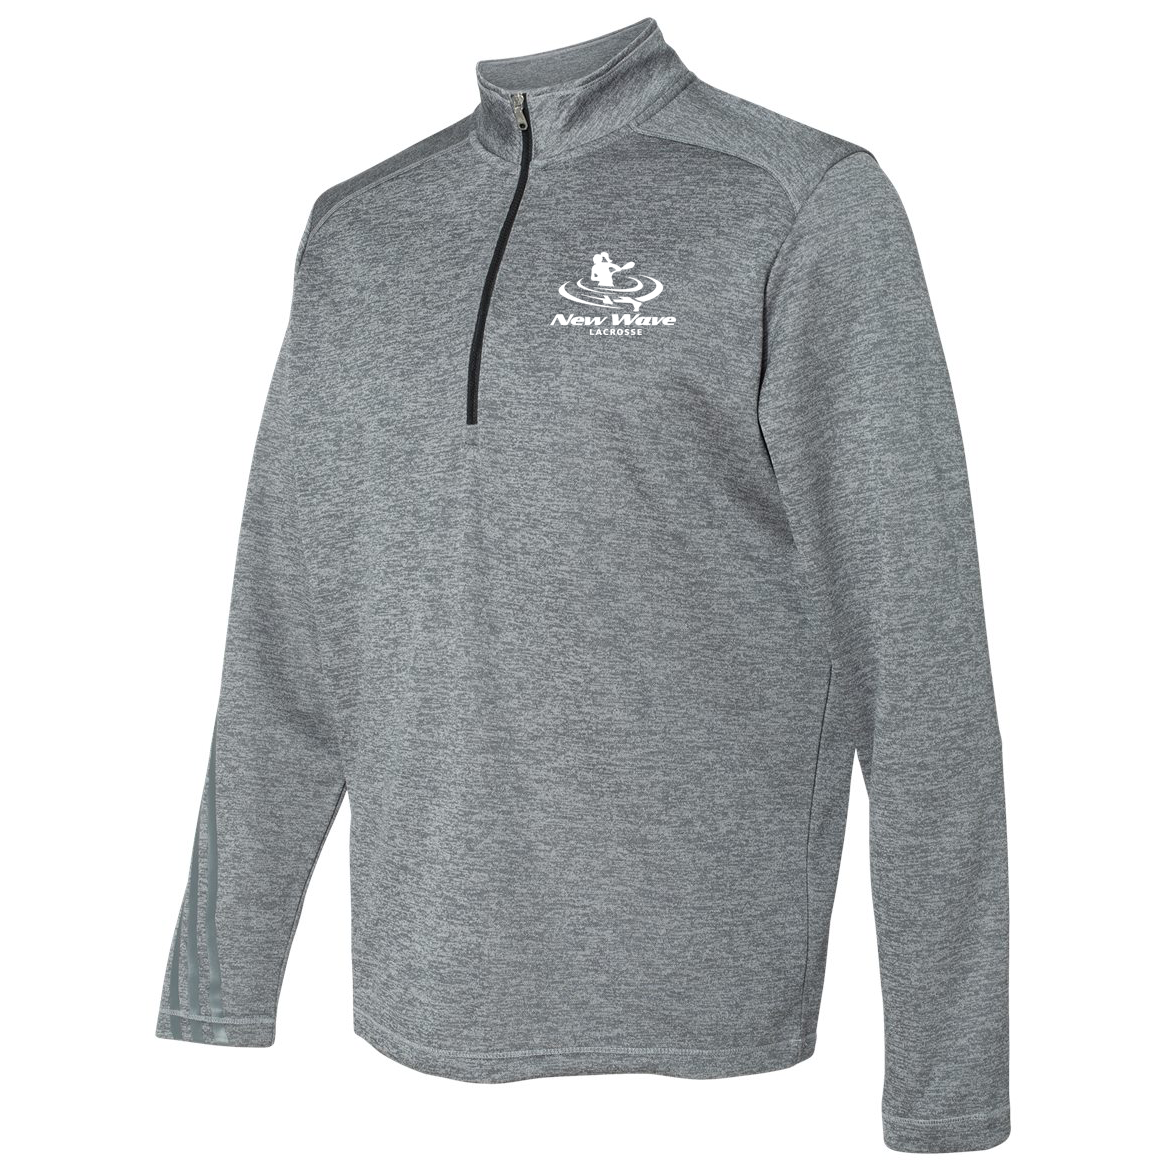 New Wave Girls Lacrosse Adidas Terry Heathered Quarter-Zip Pullover